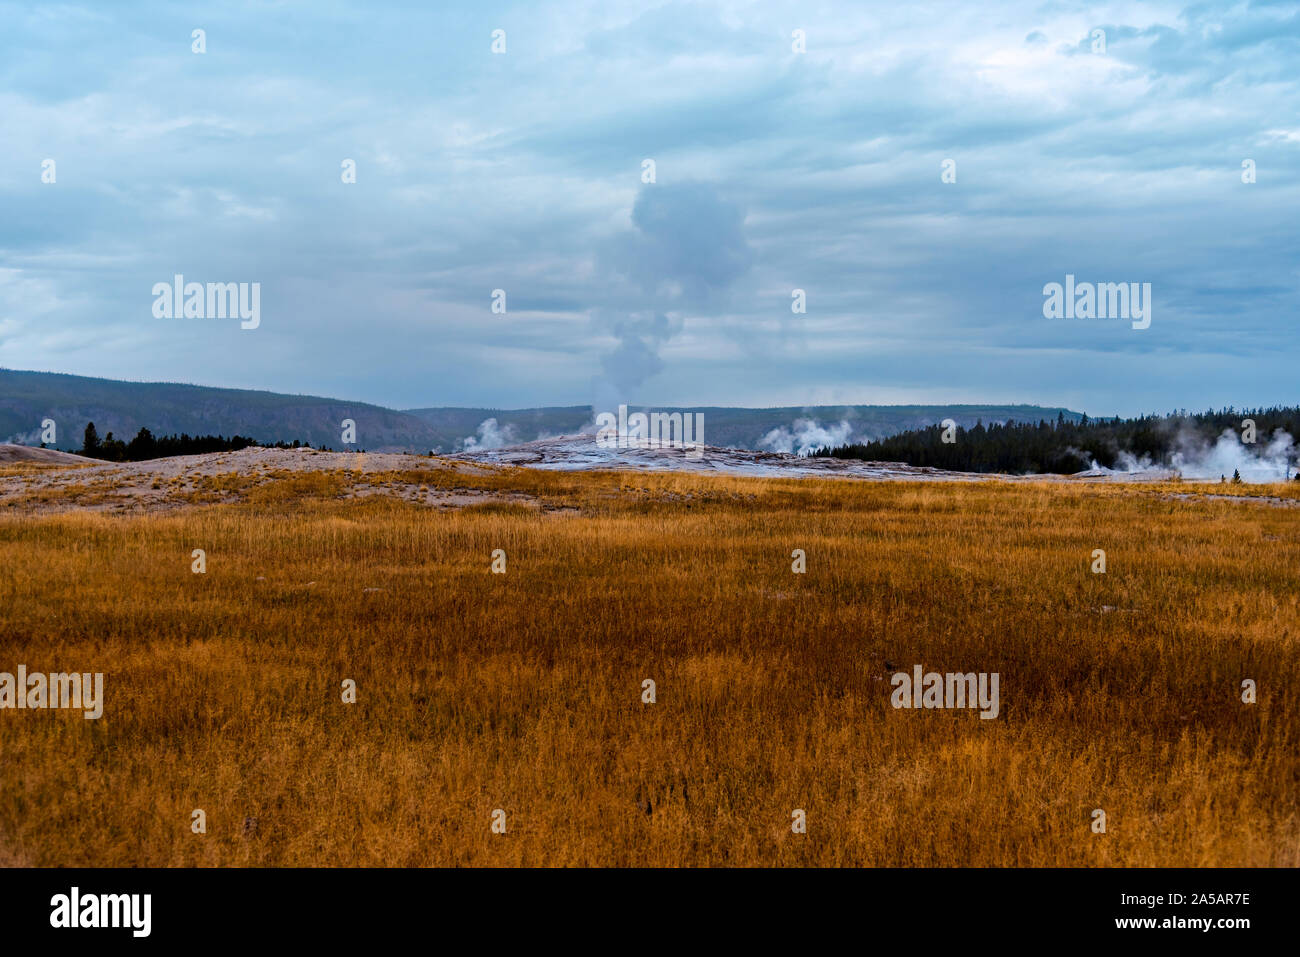 Golden brown grass fields with steam rising up off the ground under cloudy skies. Stock Photo